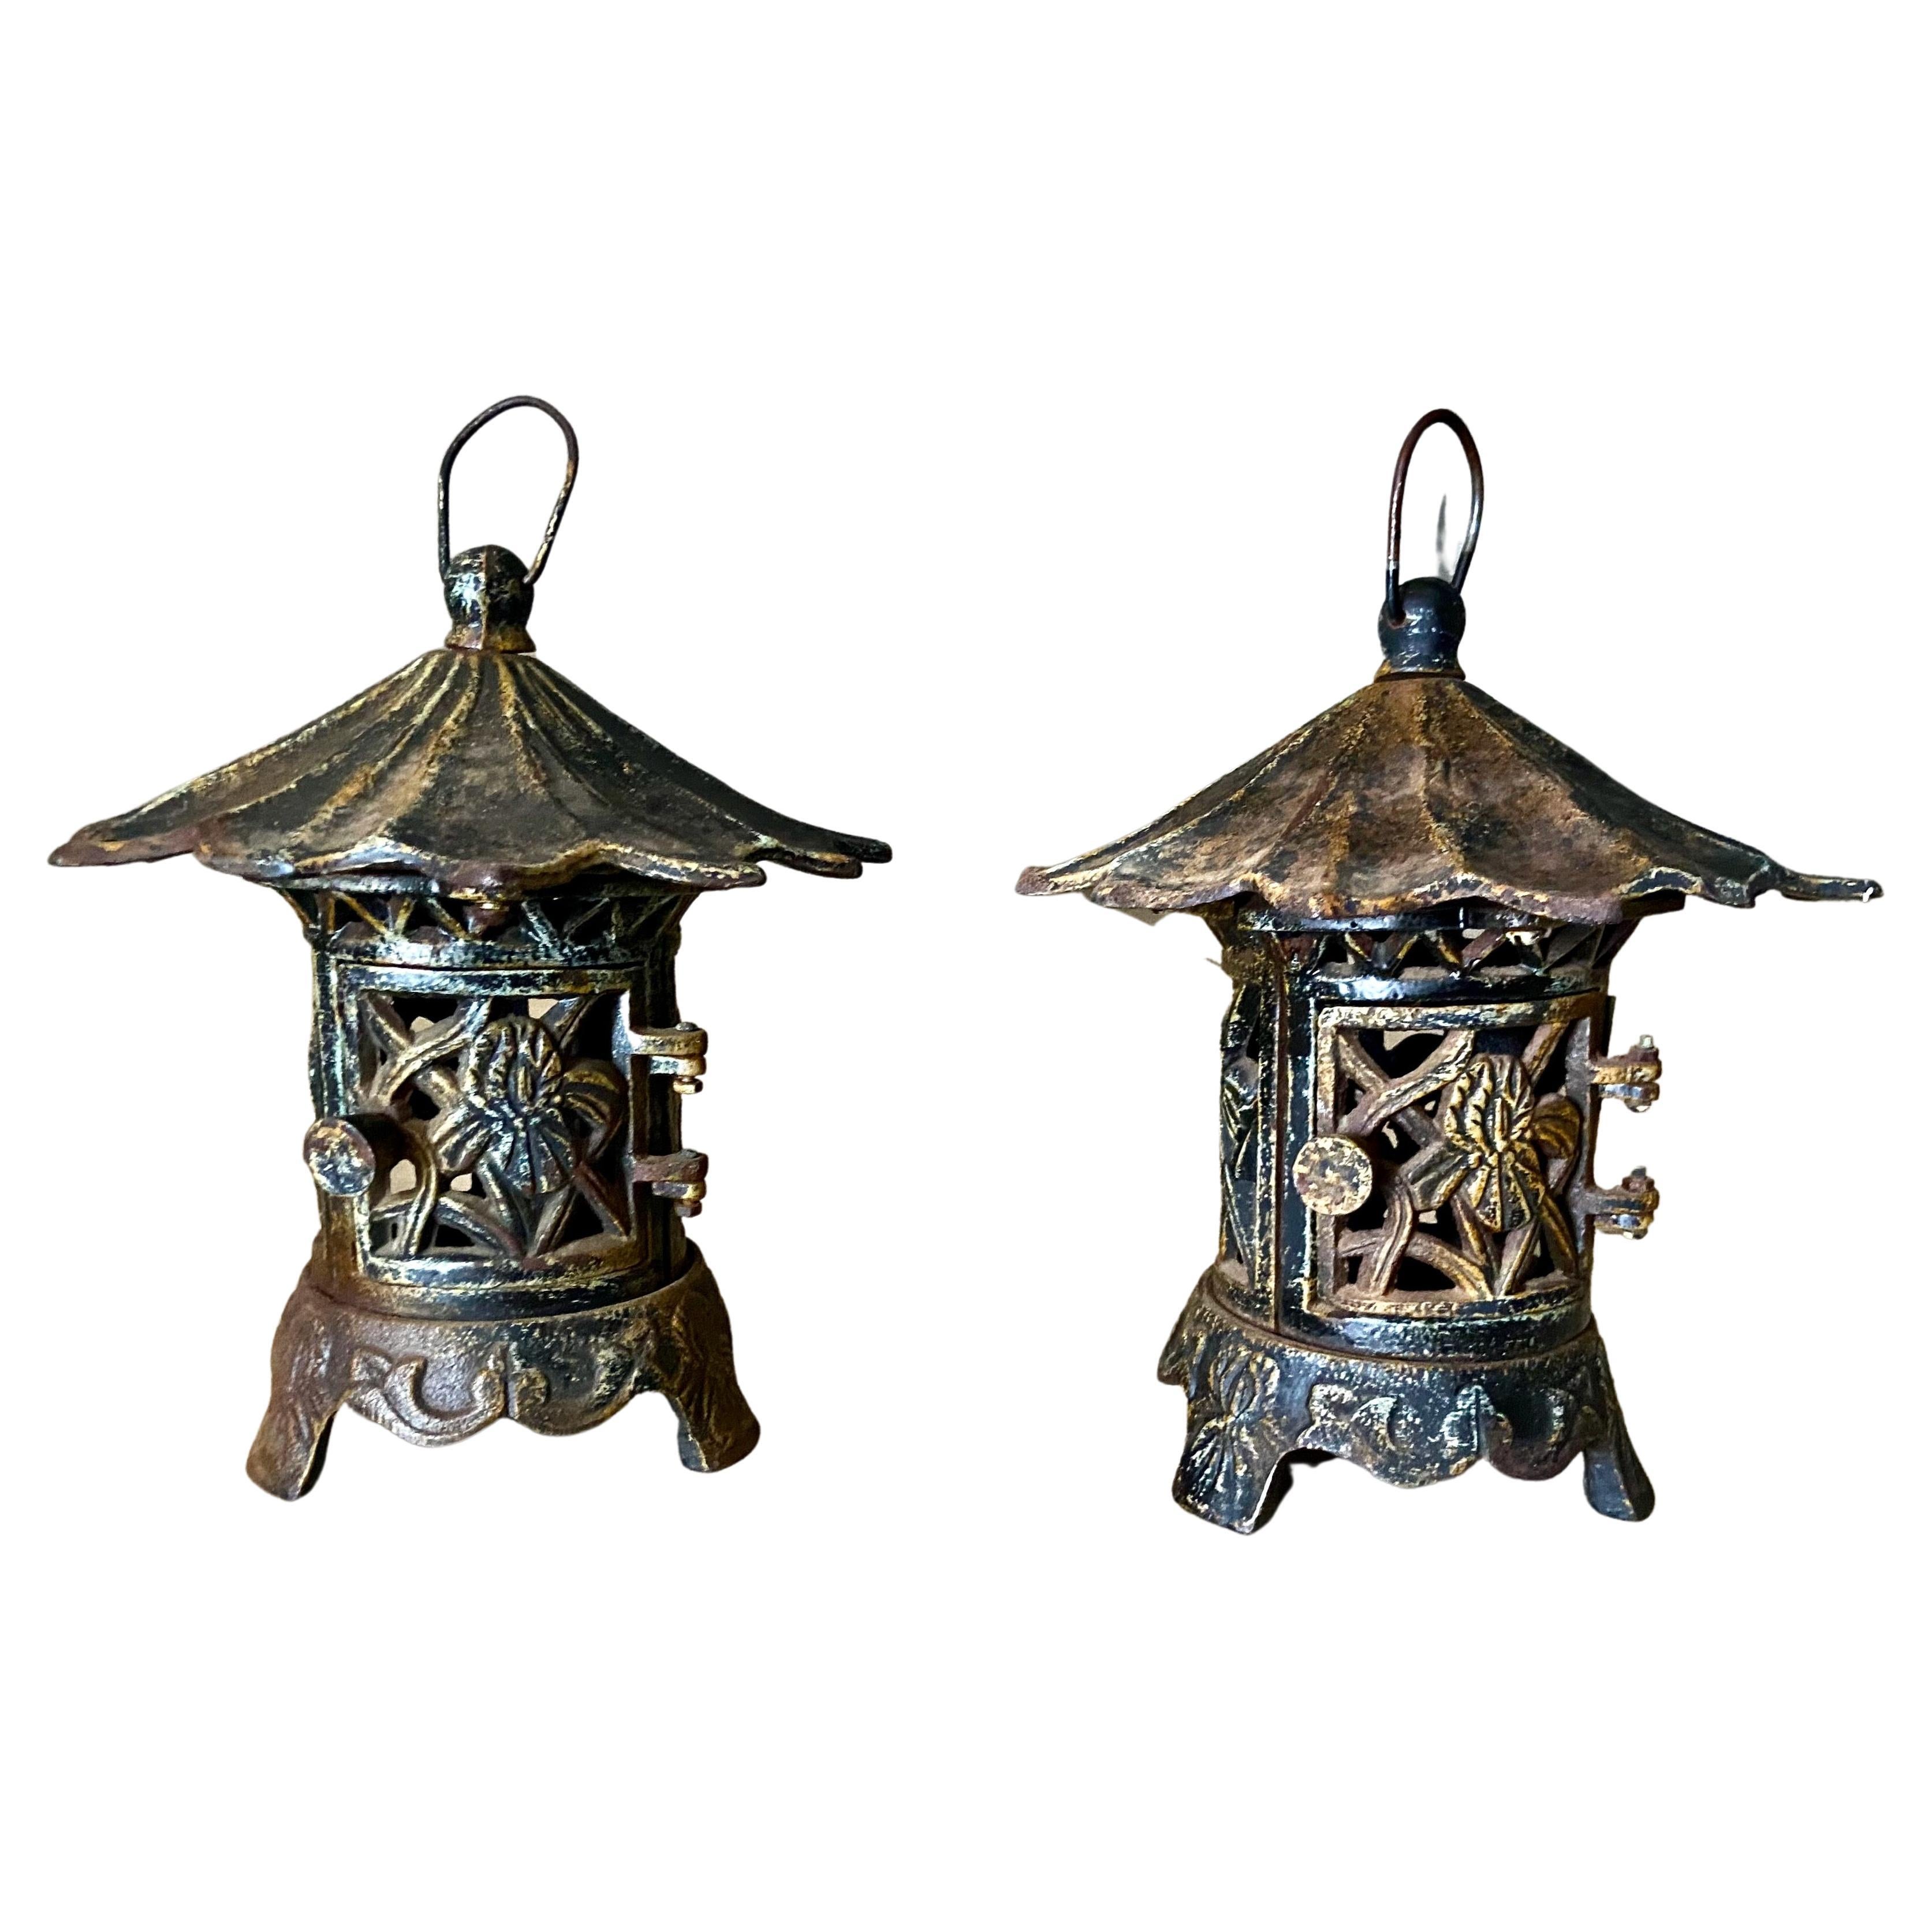 Pair Antique Chinese Iron Pagoda Garden Candle Lanterns For Sale